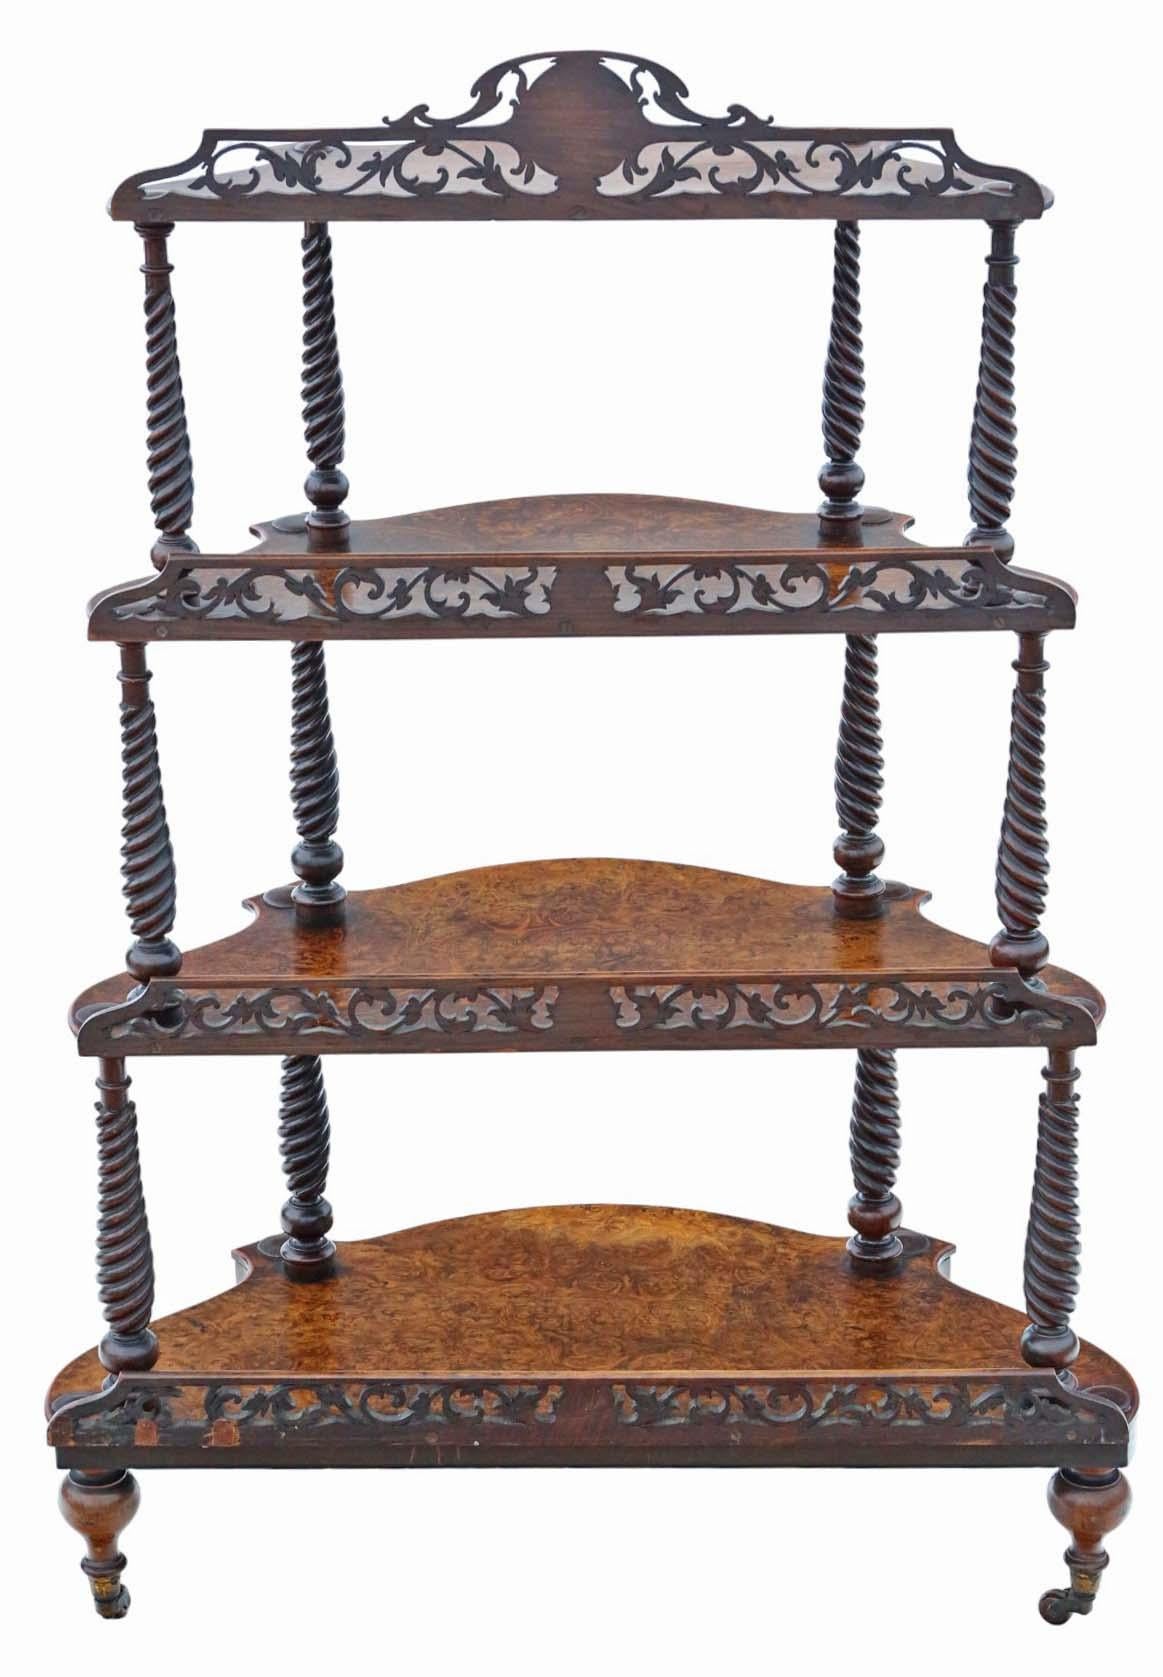 19th Century Burr Walnut Demi-Lune Console Table Quality Antique display serving For Sale 4